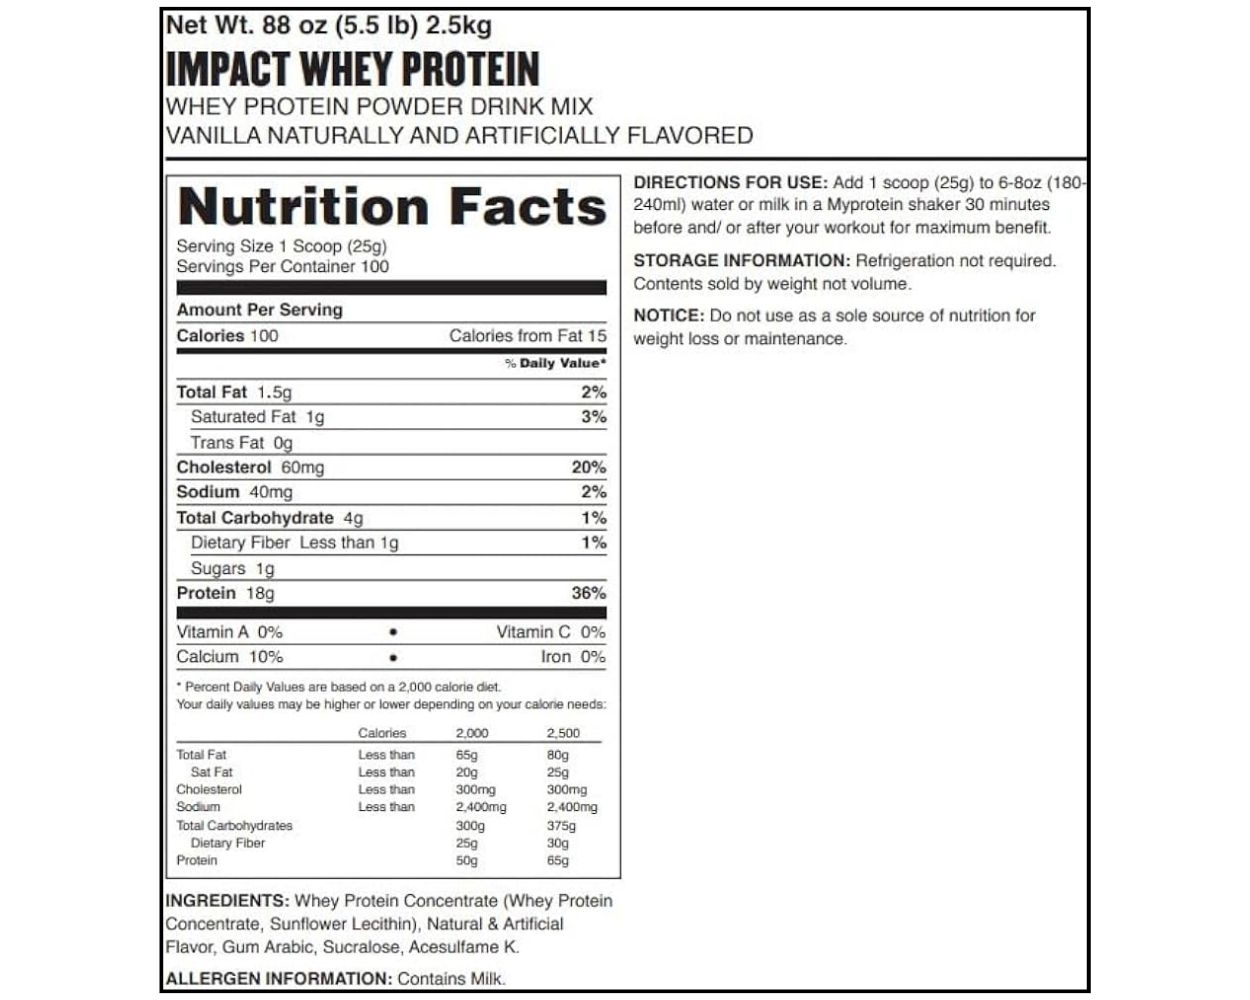 Impact Whey Protein Ingredients